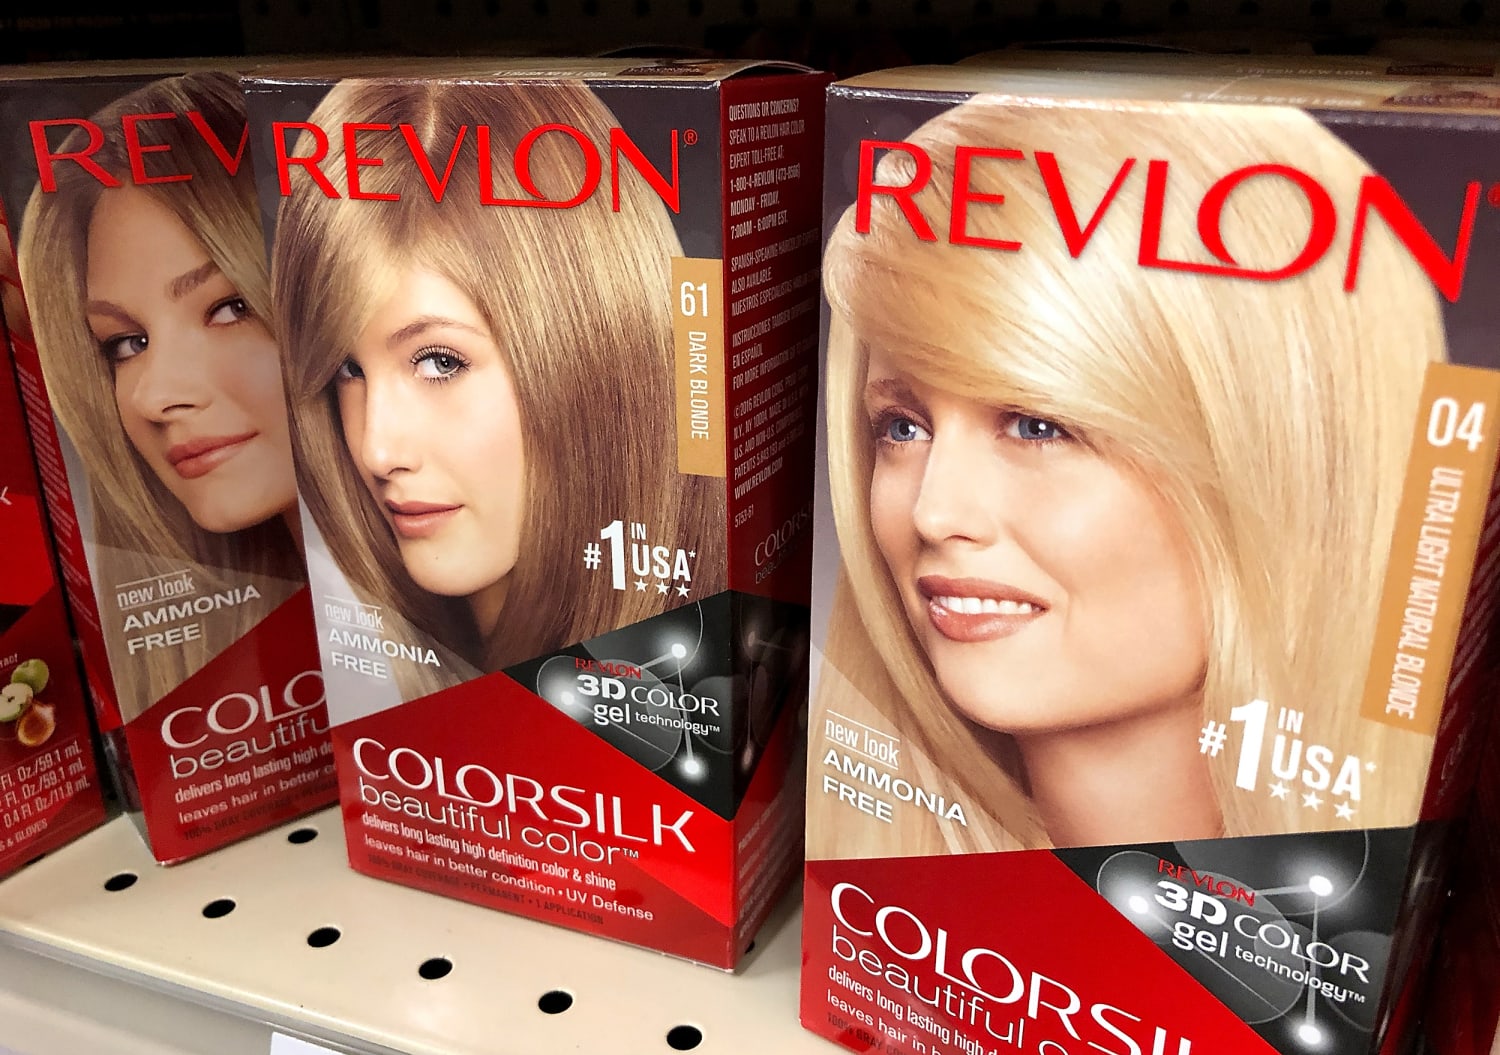 Revlon files for bankruptcy protection amid heavy debt and supply chain woes